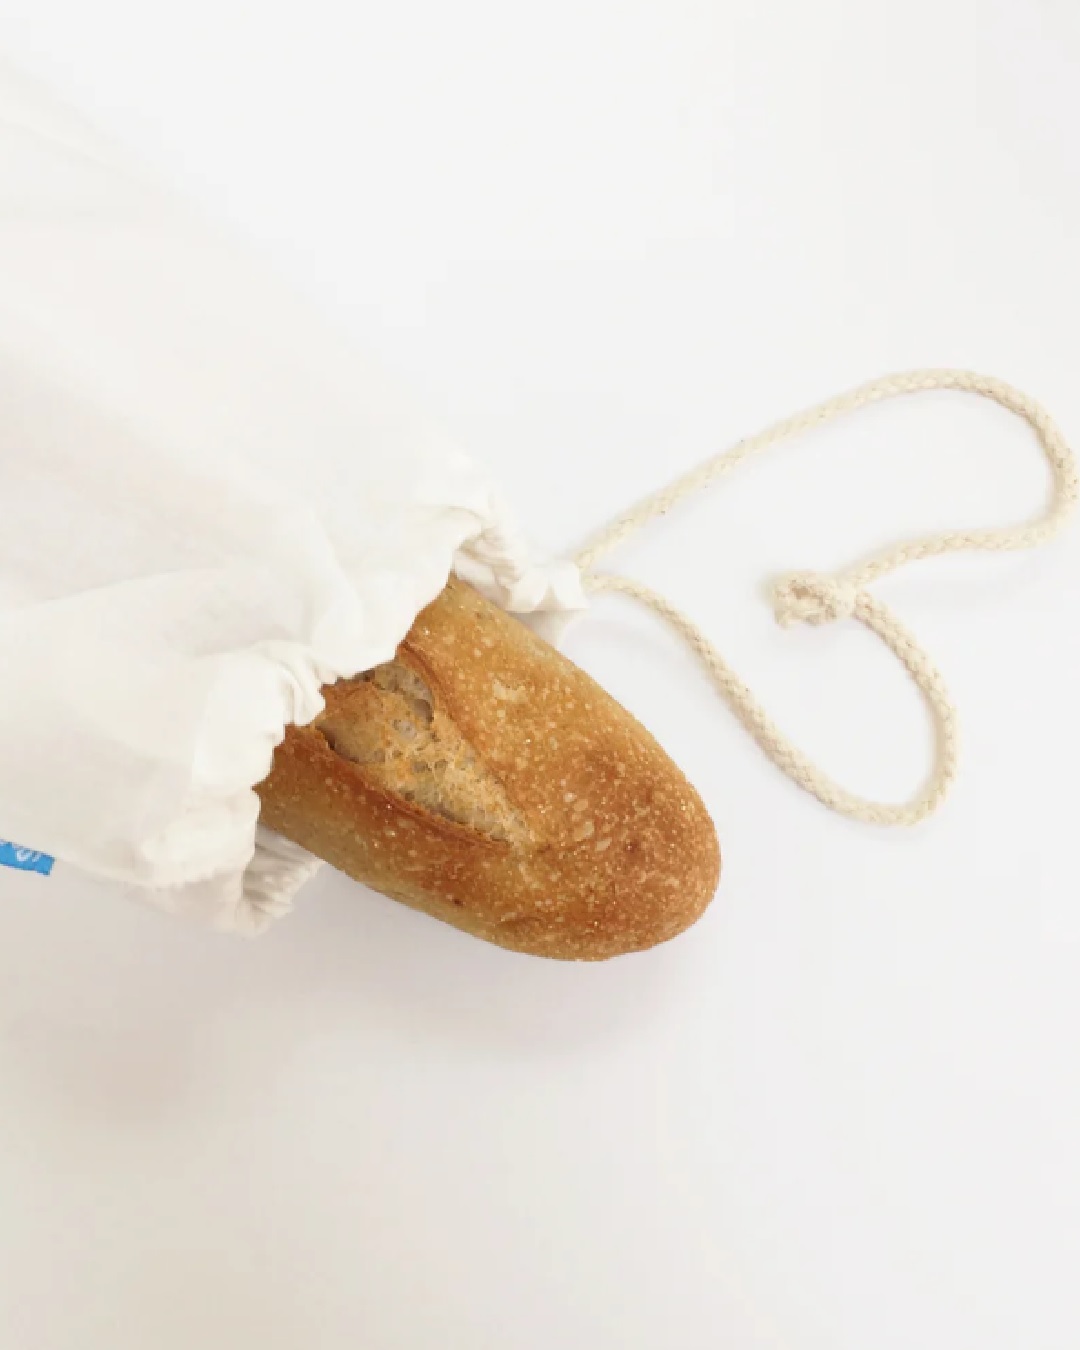 Loot bag with bread in